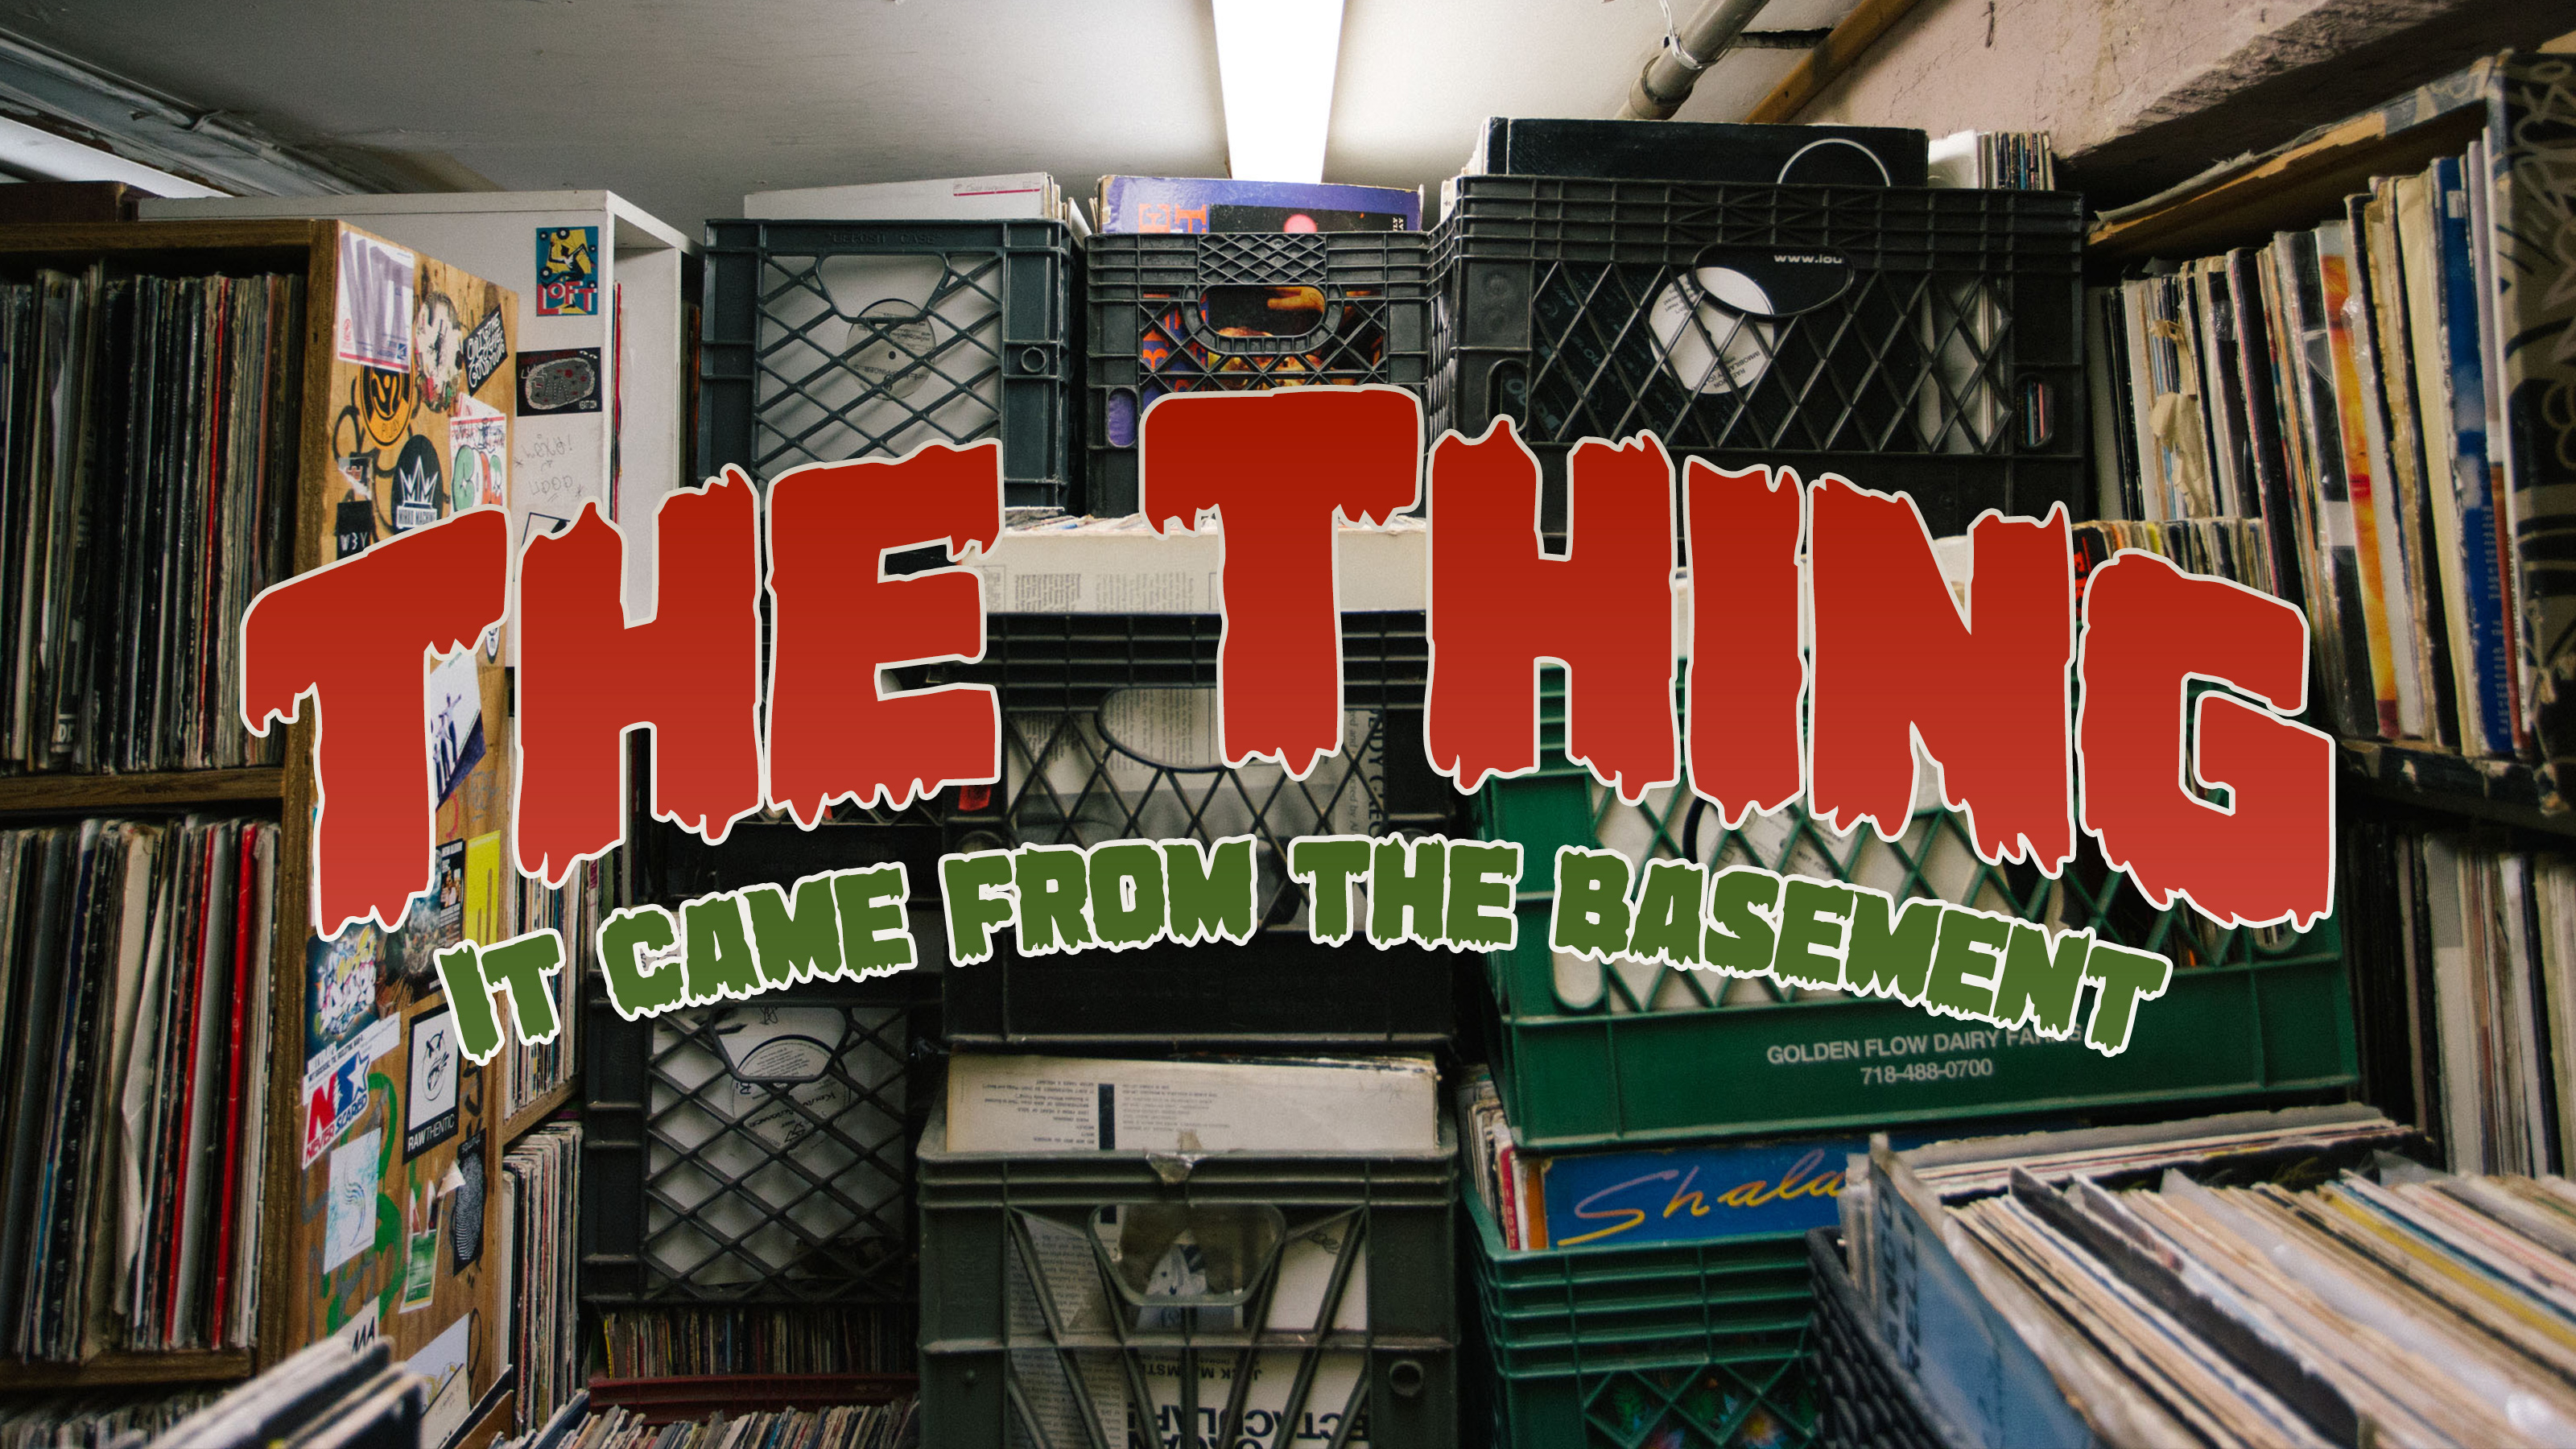 The Thing: It came from the basement